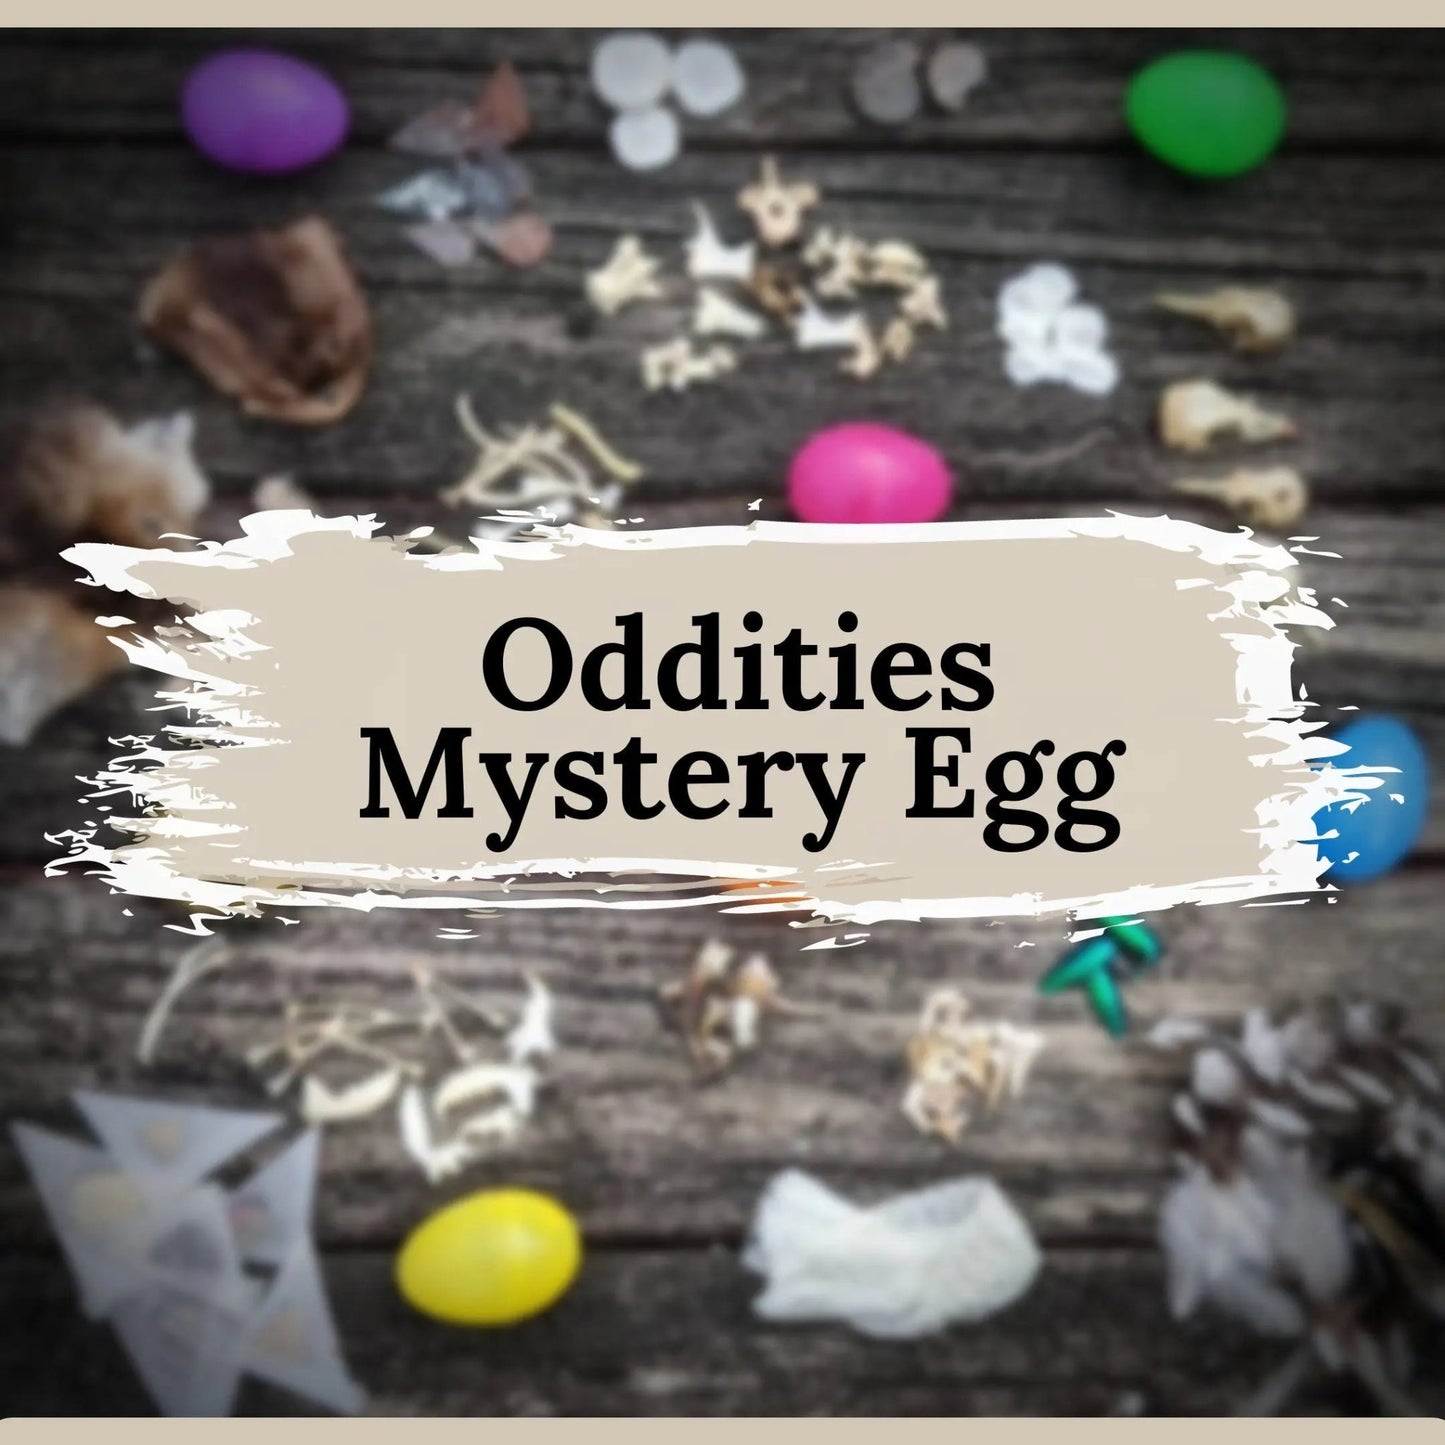 Oddities Mystery Easter Egg - Uniquely Morbid